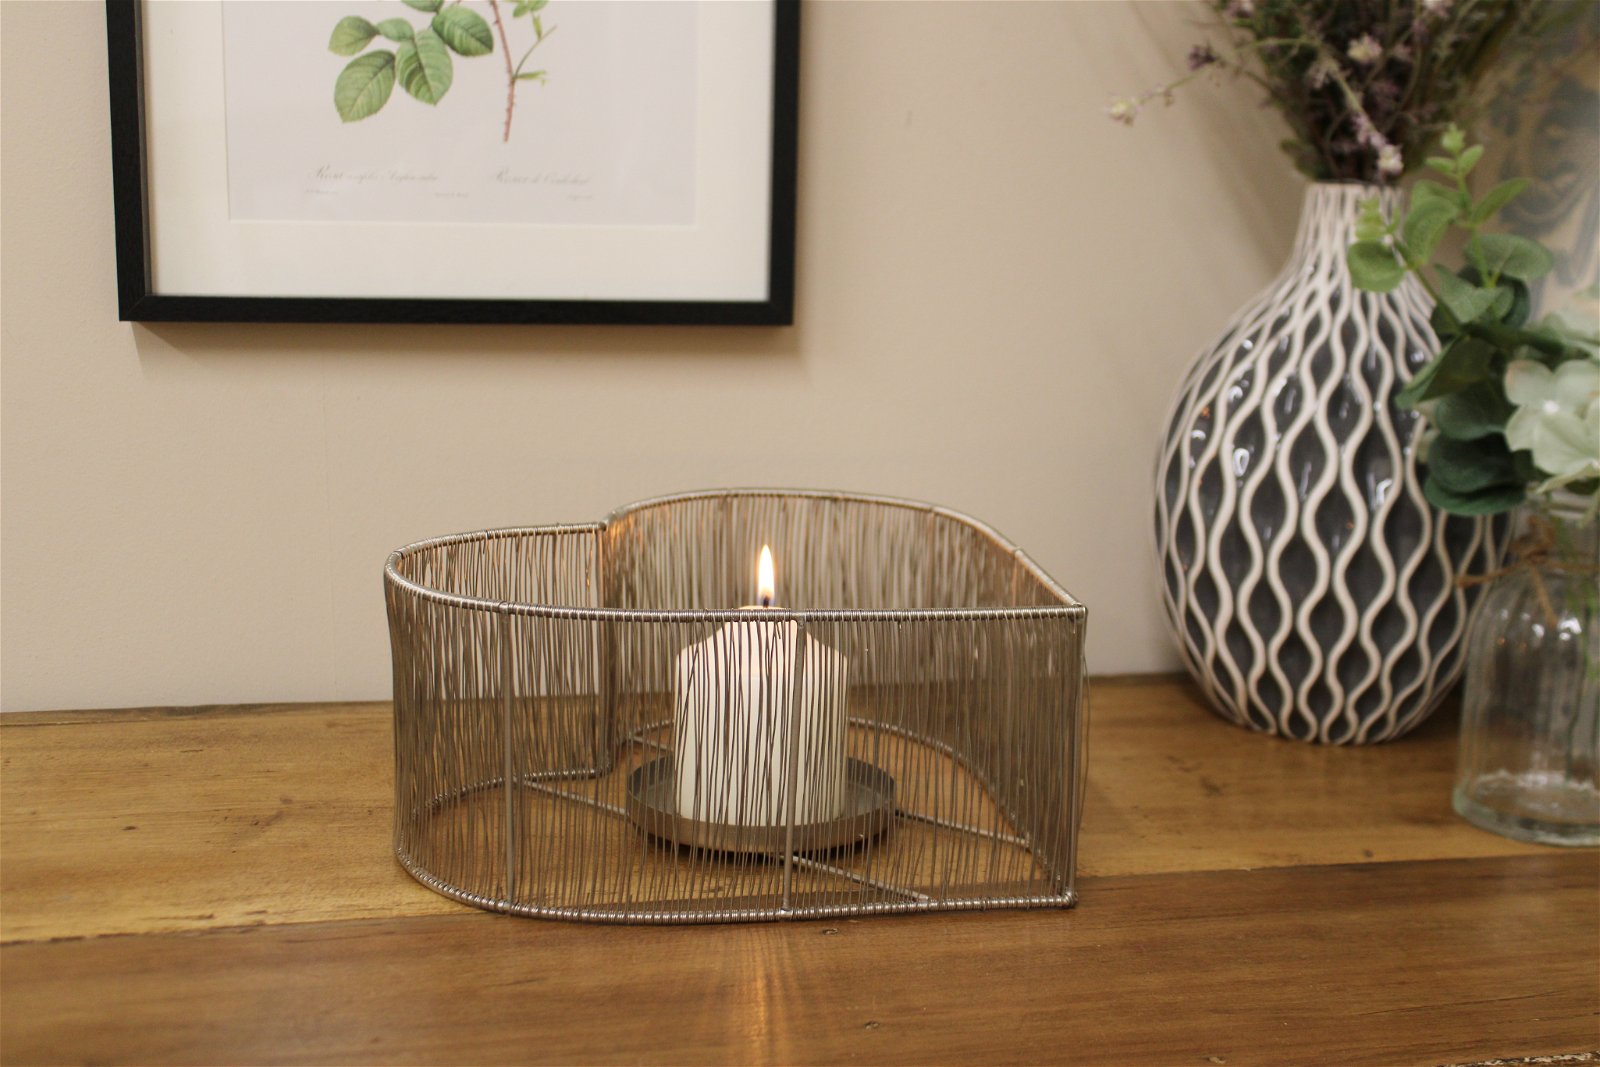 Silver Heart Candle Holder  from Eleanoras